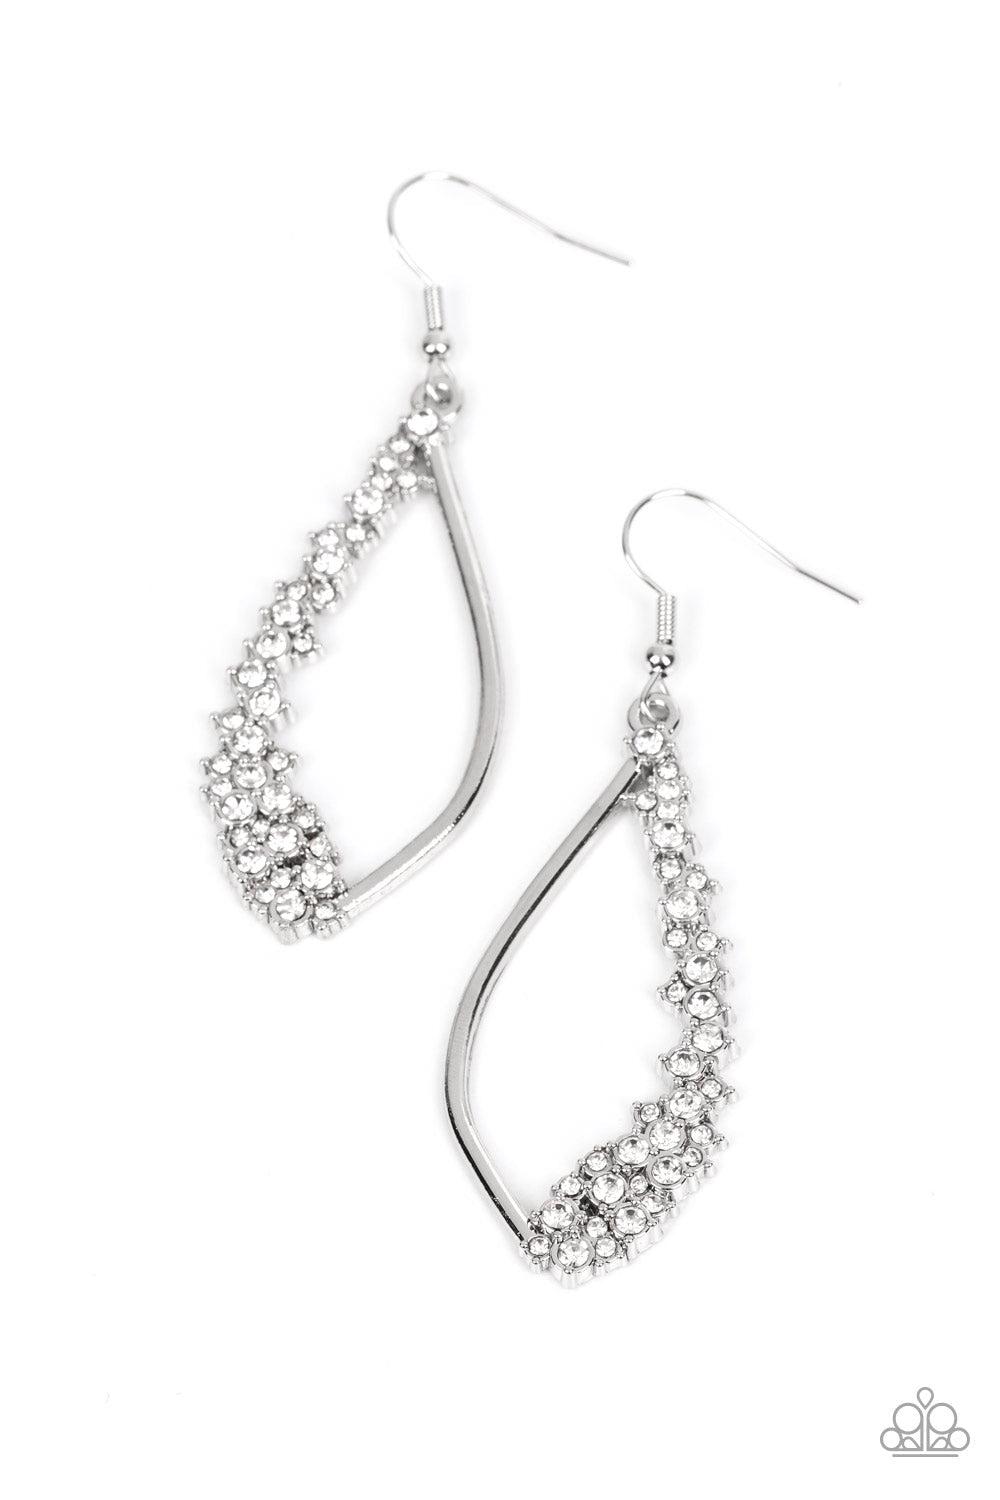 Sparkly Side Effects White Rhinestone Earrings - Paparazzi Accessories- lightbox - CarasShop.com - $5 Jewelry by Cara Jewels